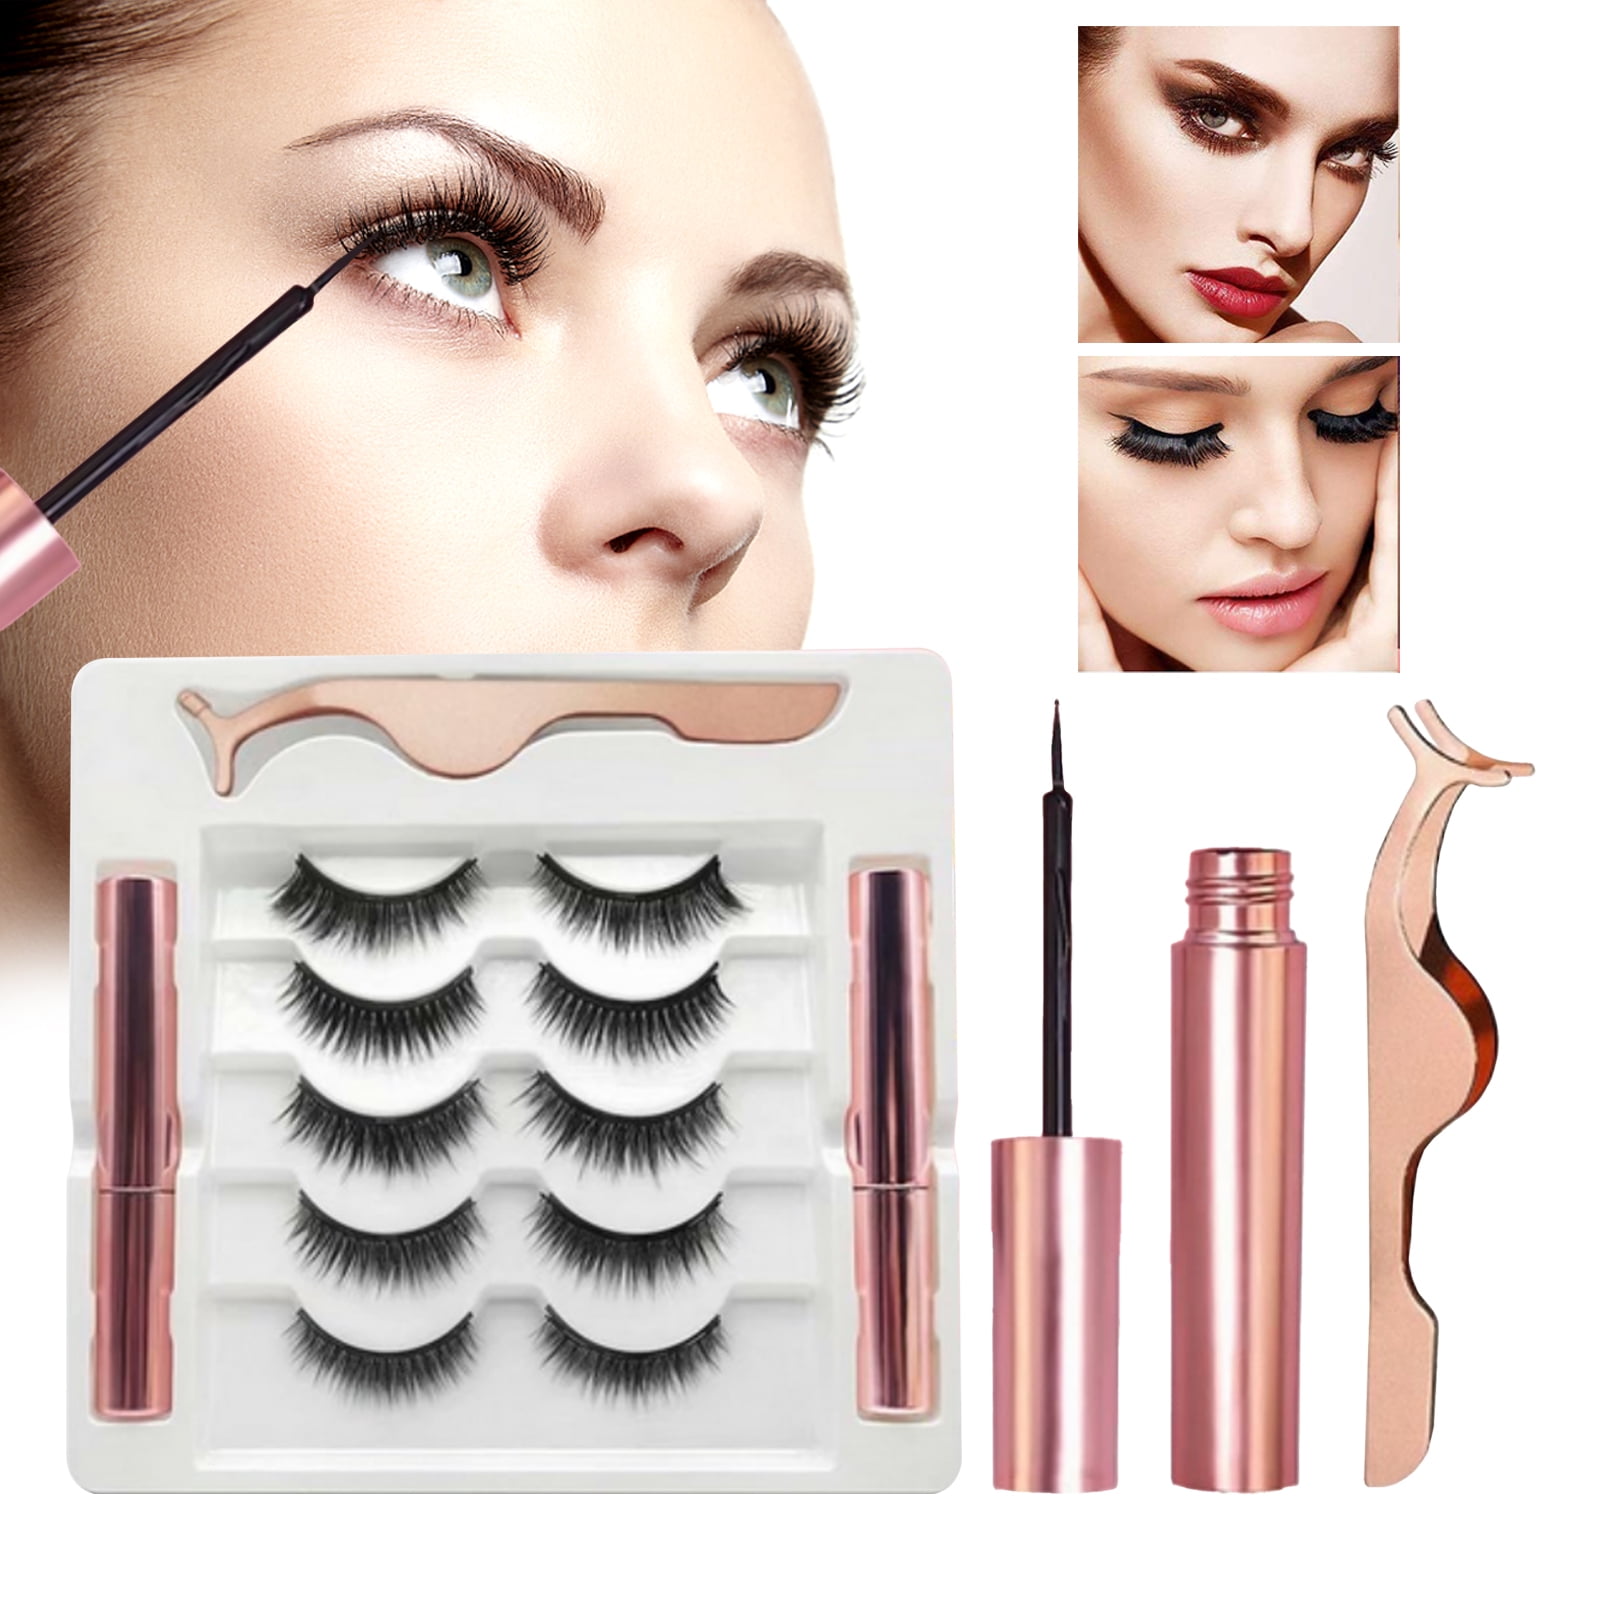 Cosprof Magnetic Eyelashes 5 Pairs Kit with Reusable Magnetic Lashes - Walmart.com